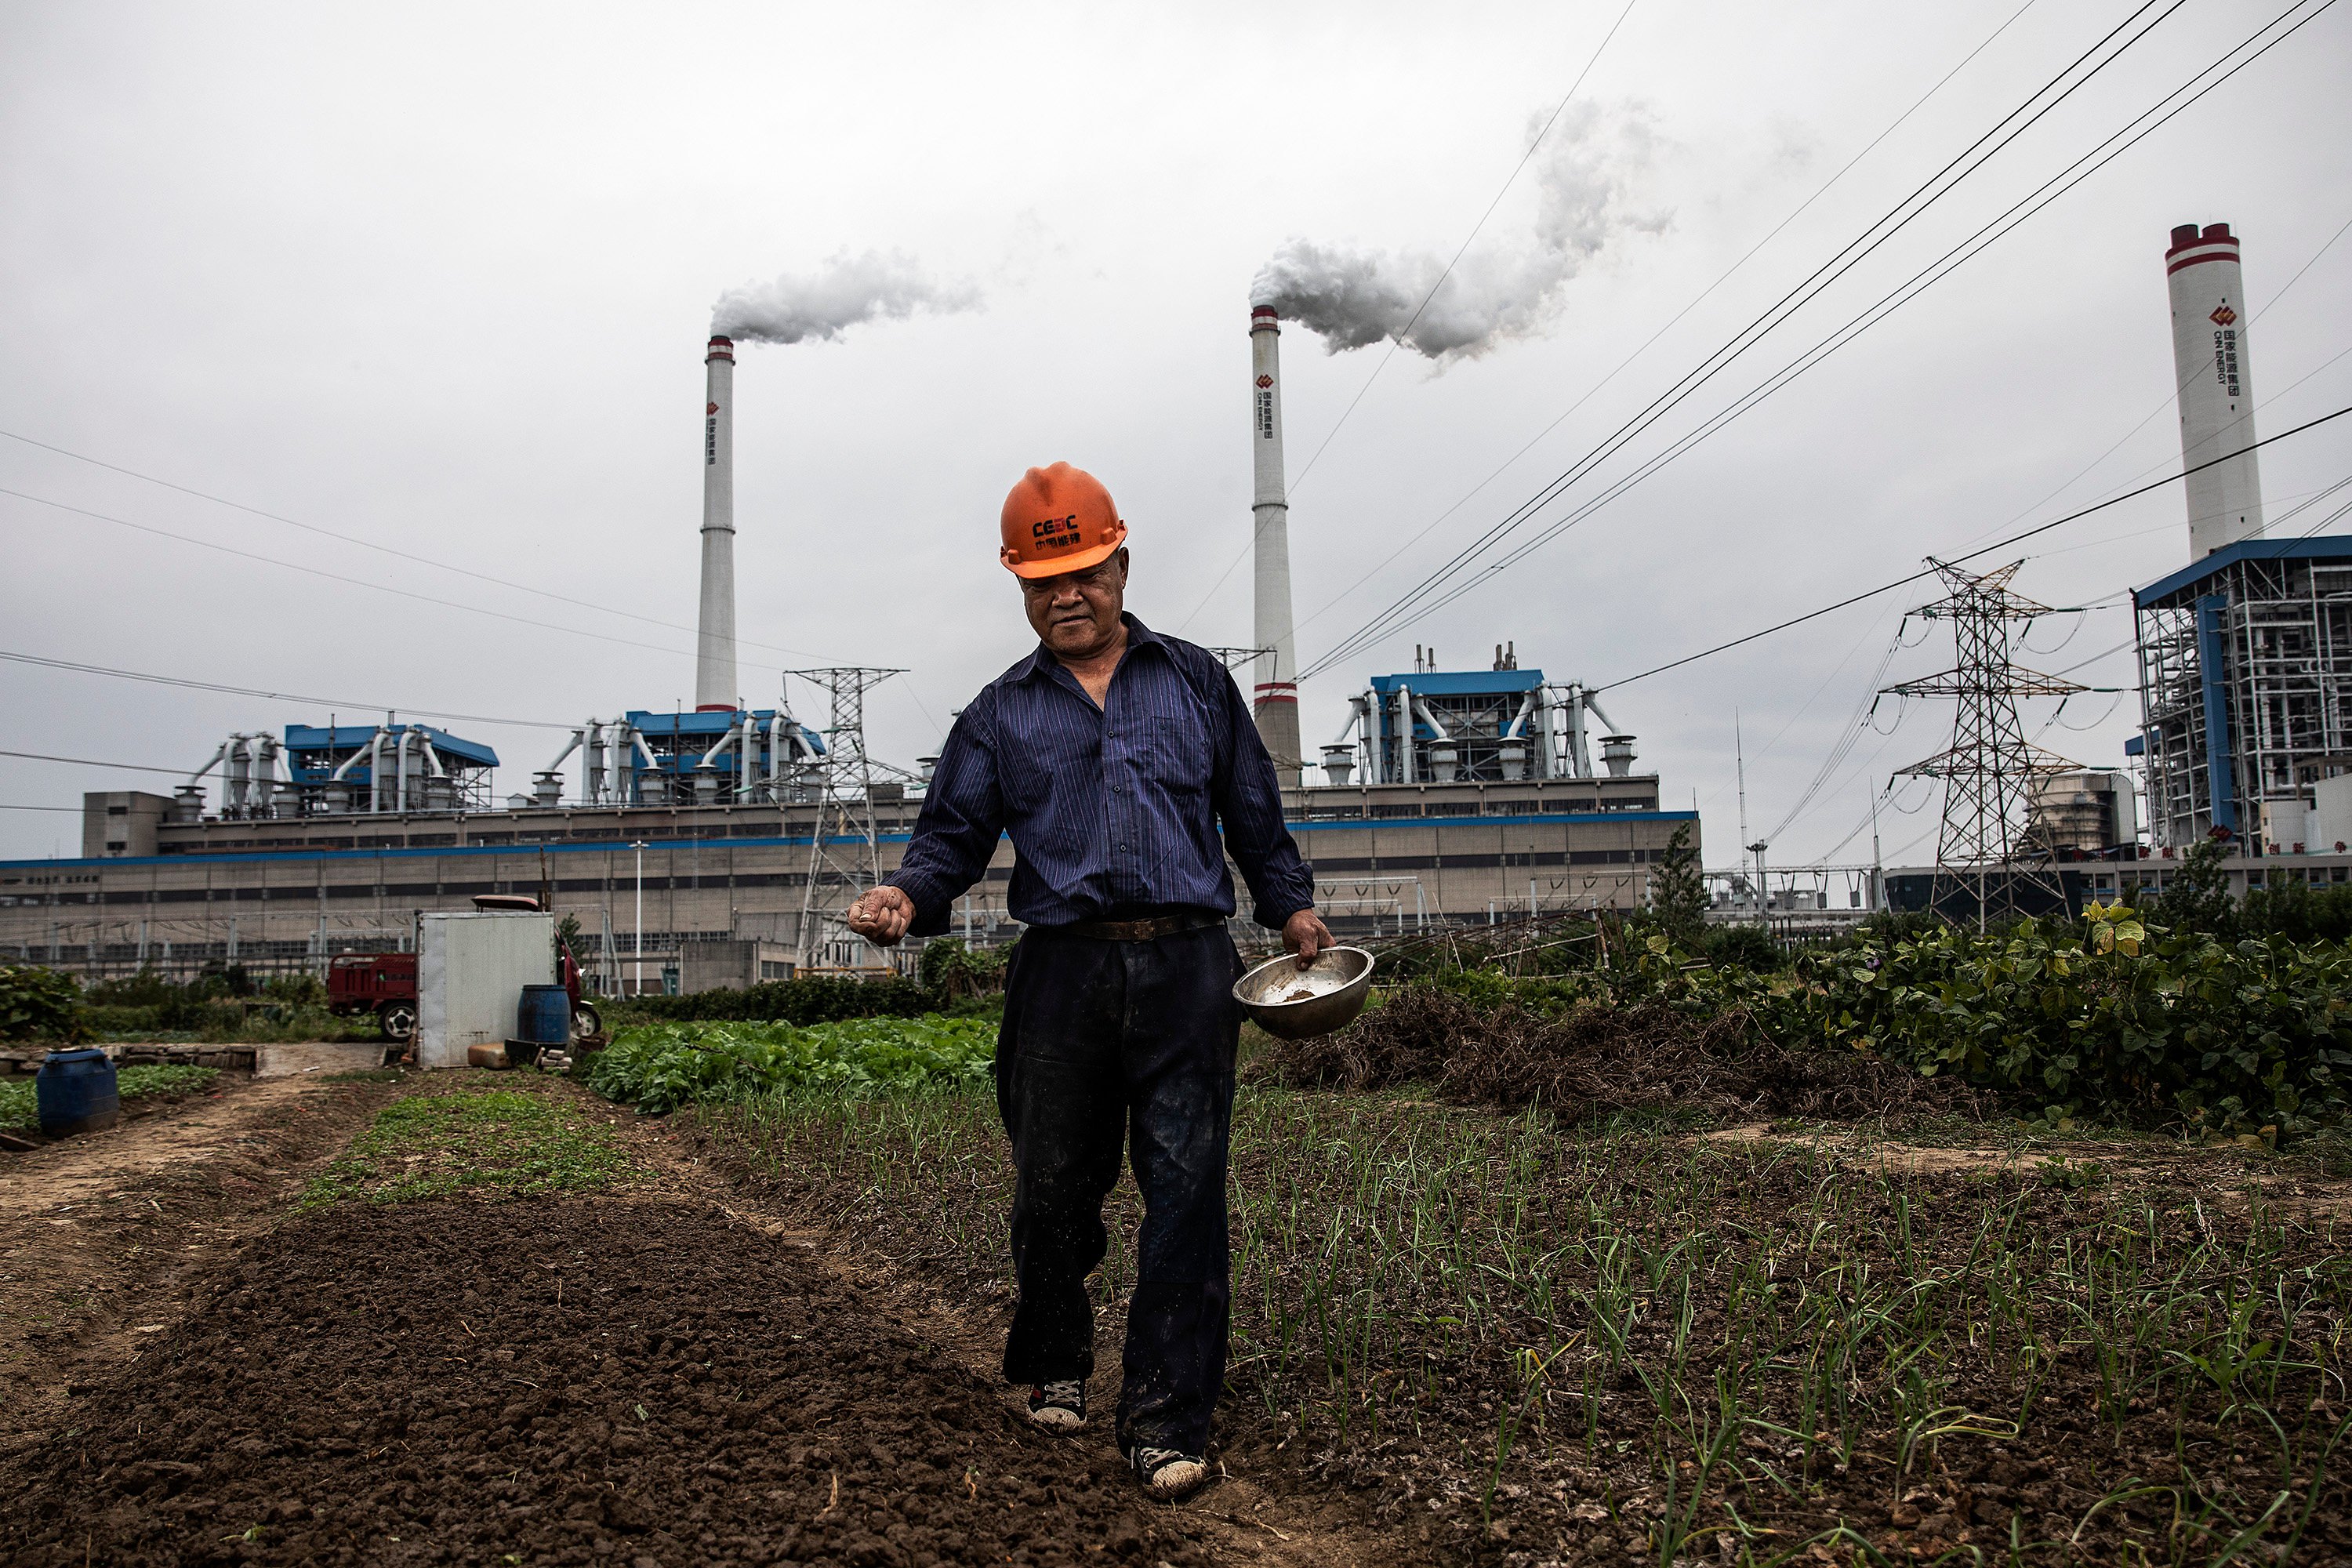 A man waters plants in front of a coal-fired power plant in Hanchuan, China’s Hubei province, on October 13, 2021. To stabilise domestic energy supply, China is pushing its coal output to 12 million tonnes a day. Photo: Getty Images